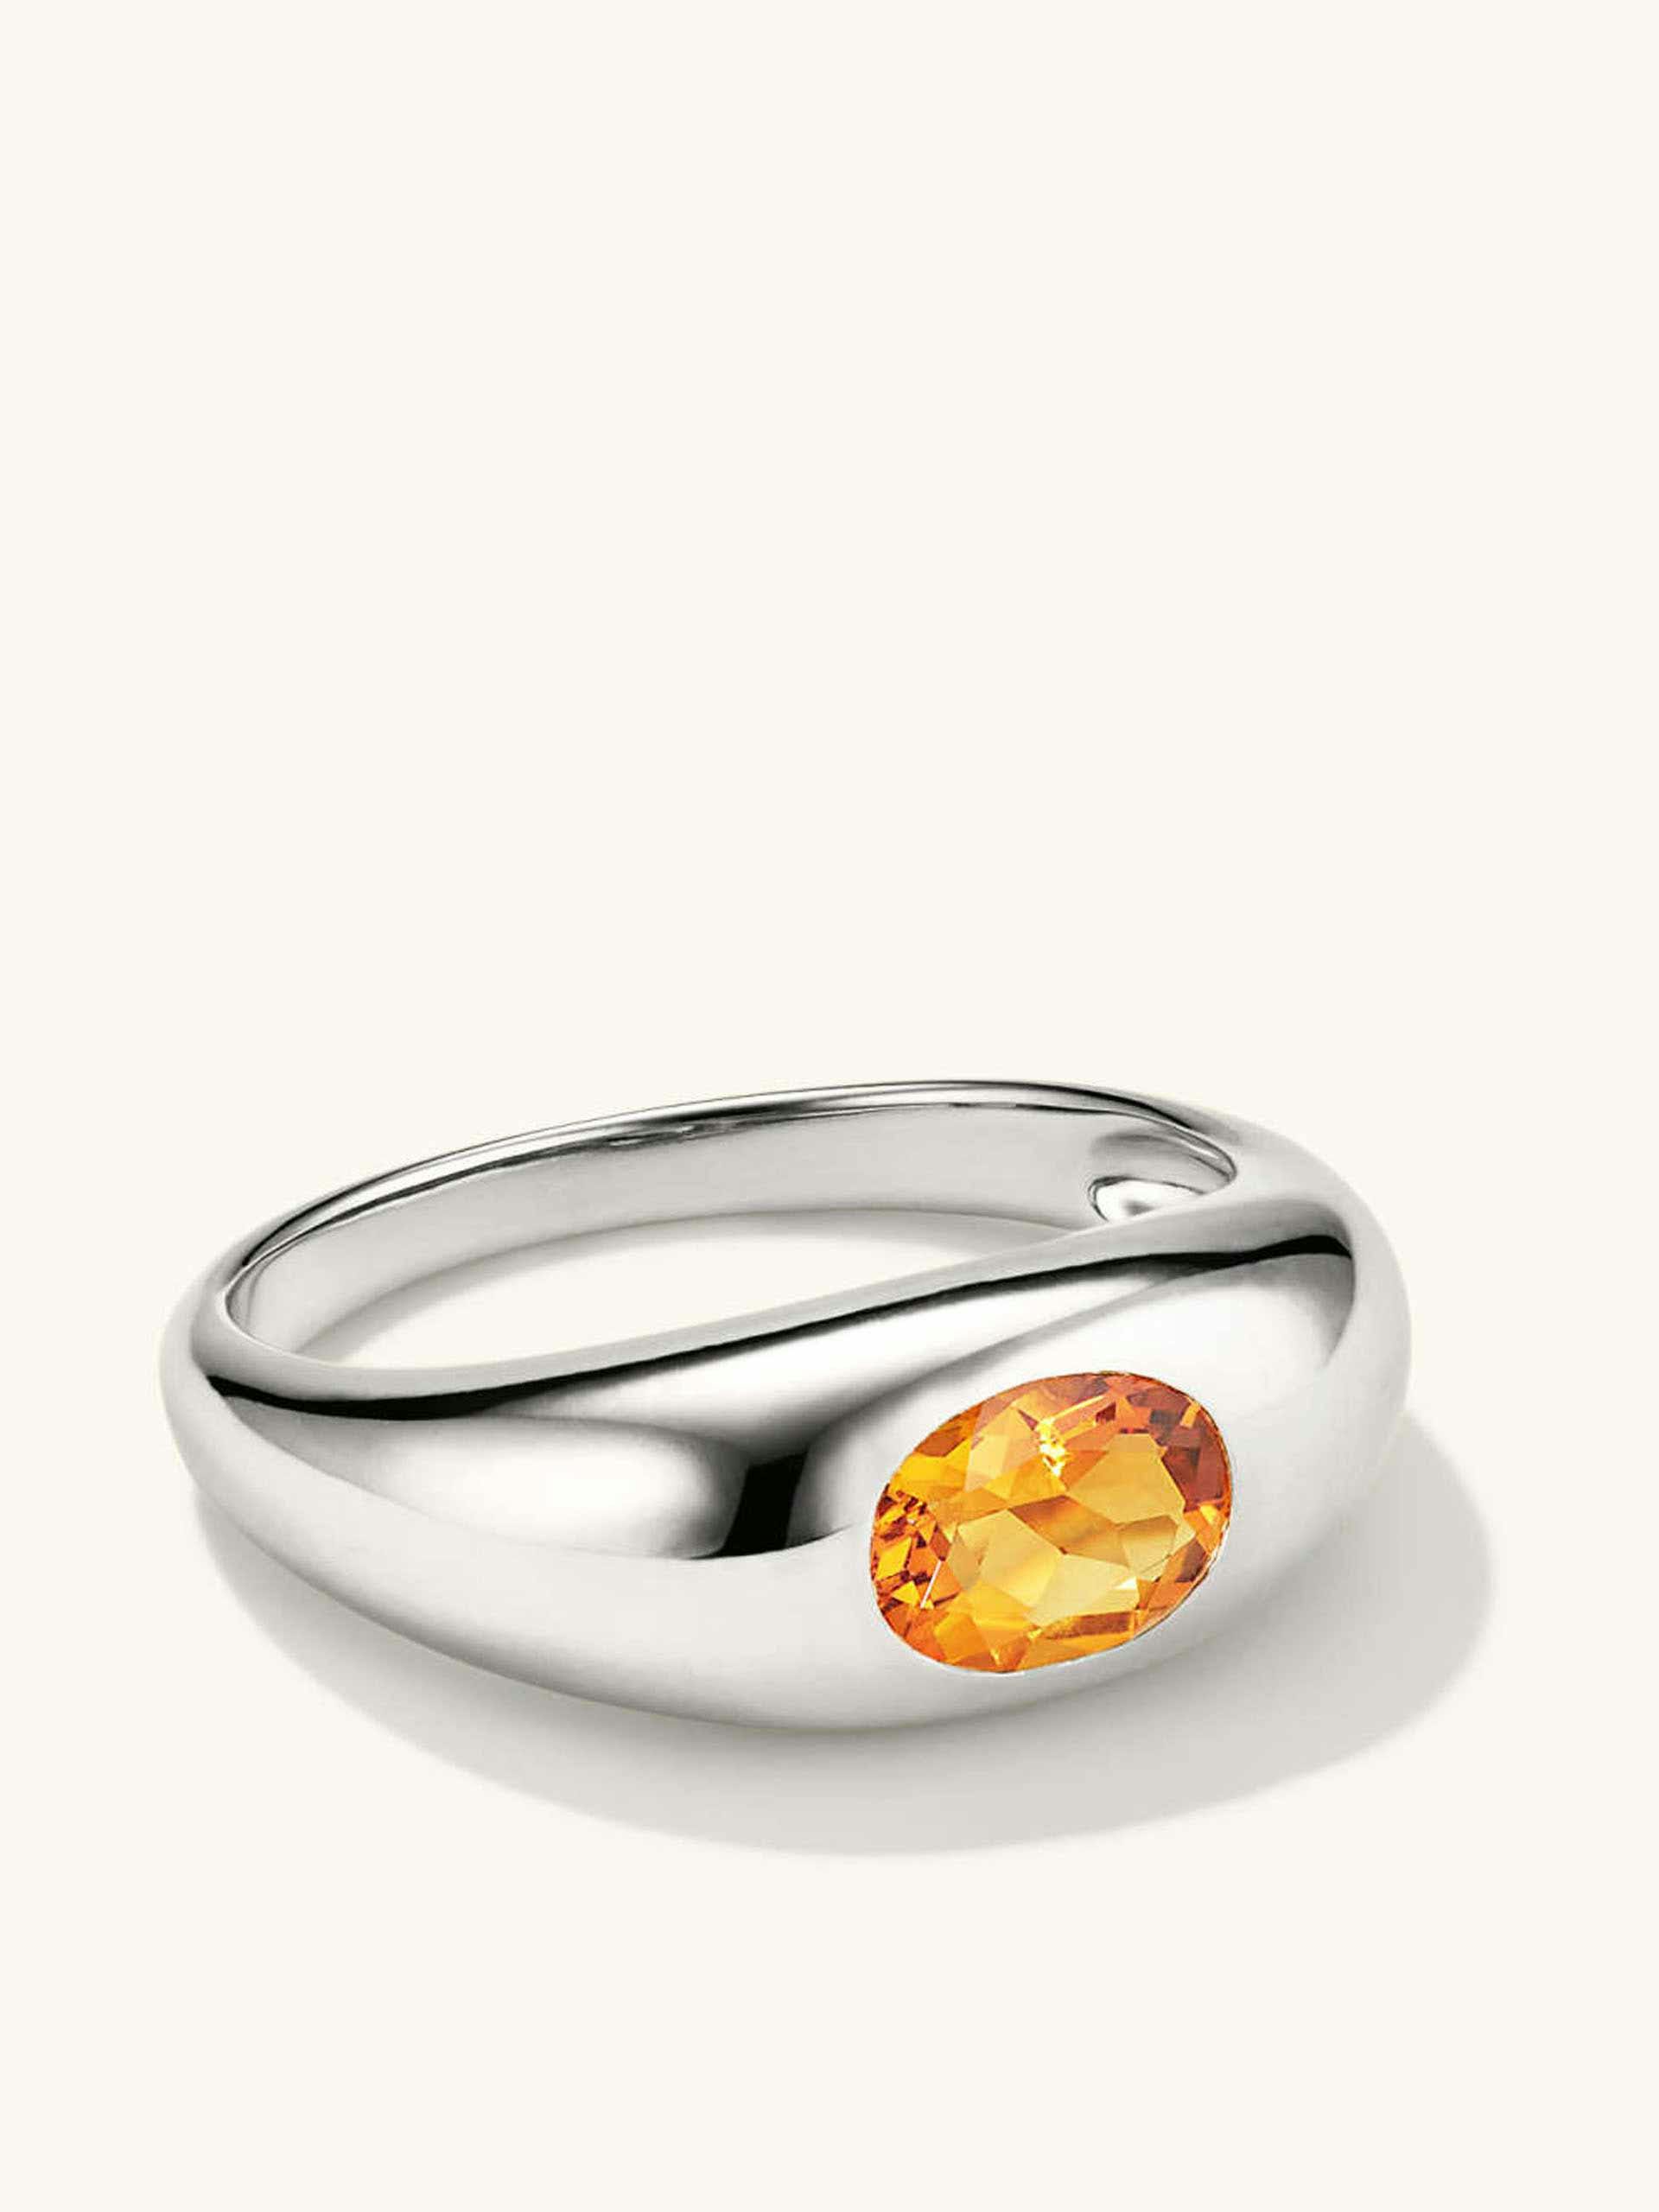 Sterling silver ring with citrine gemstone